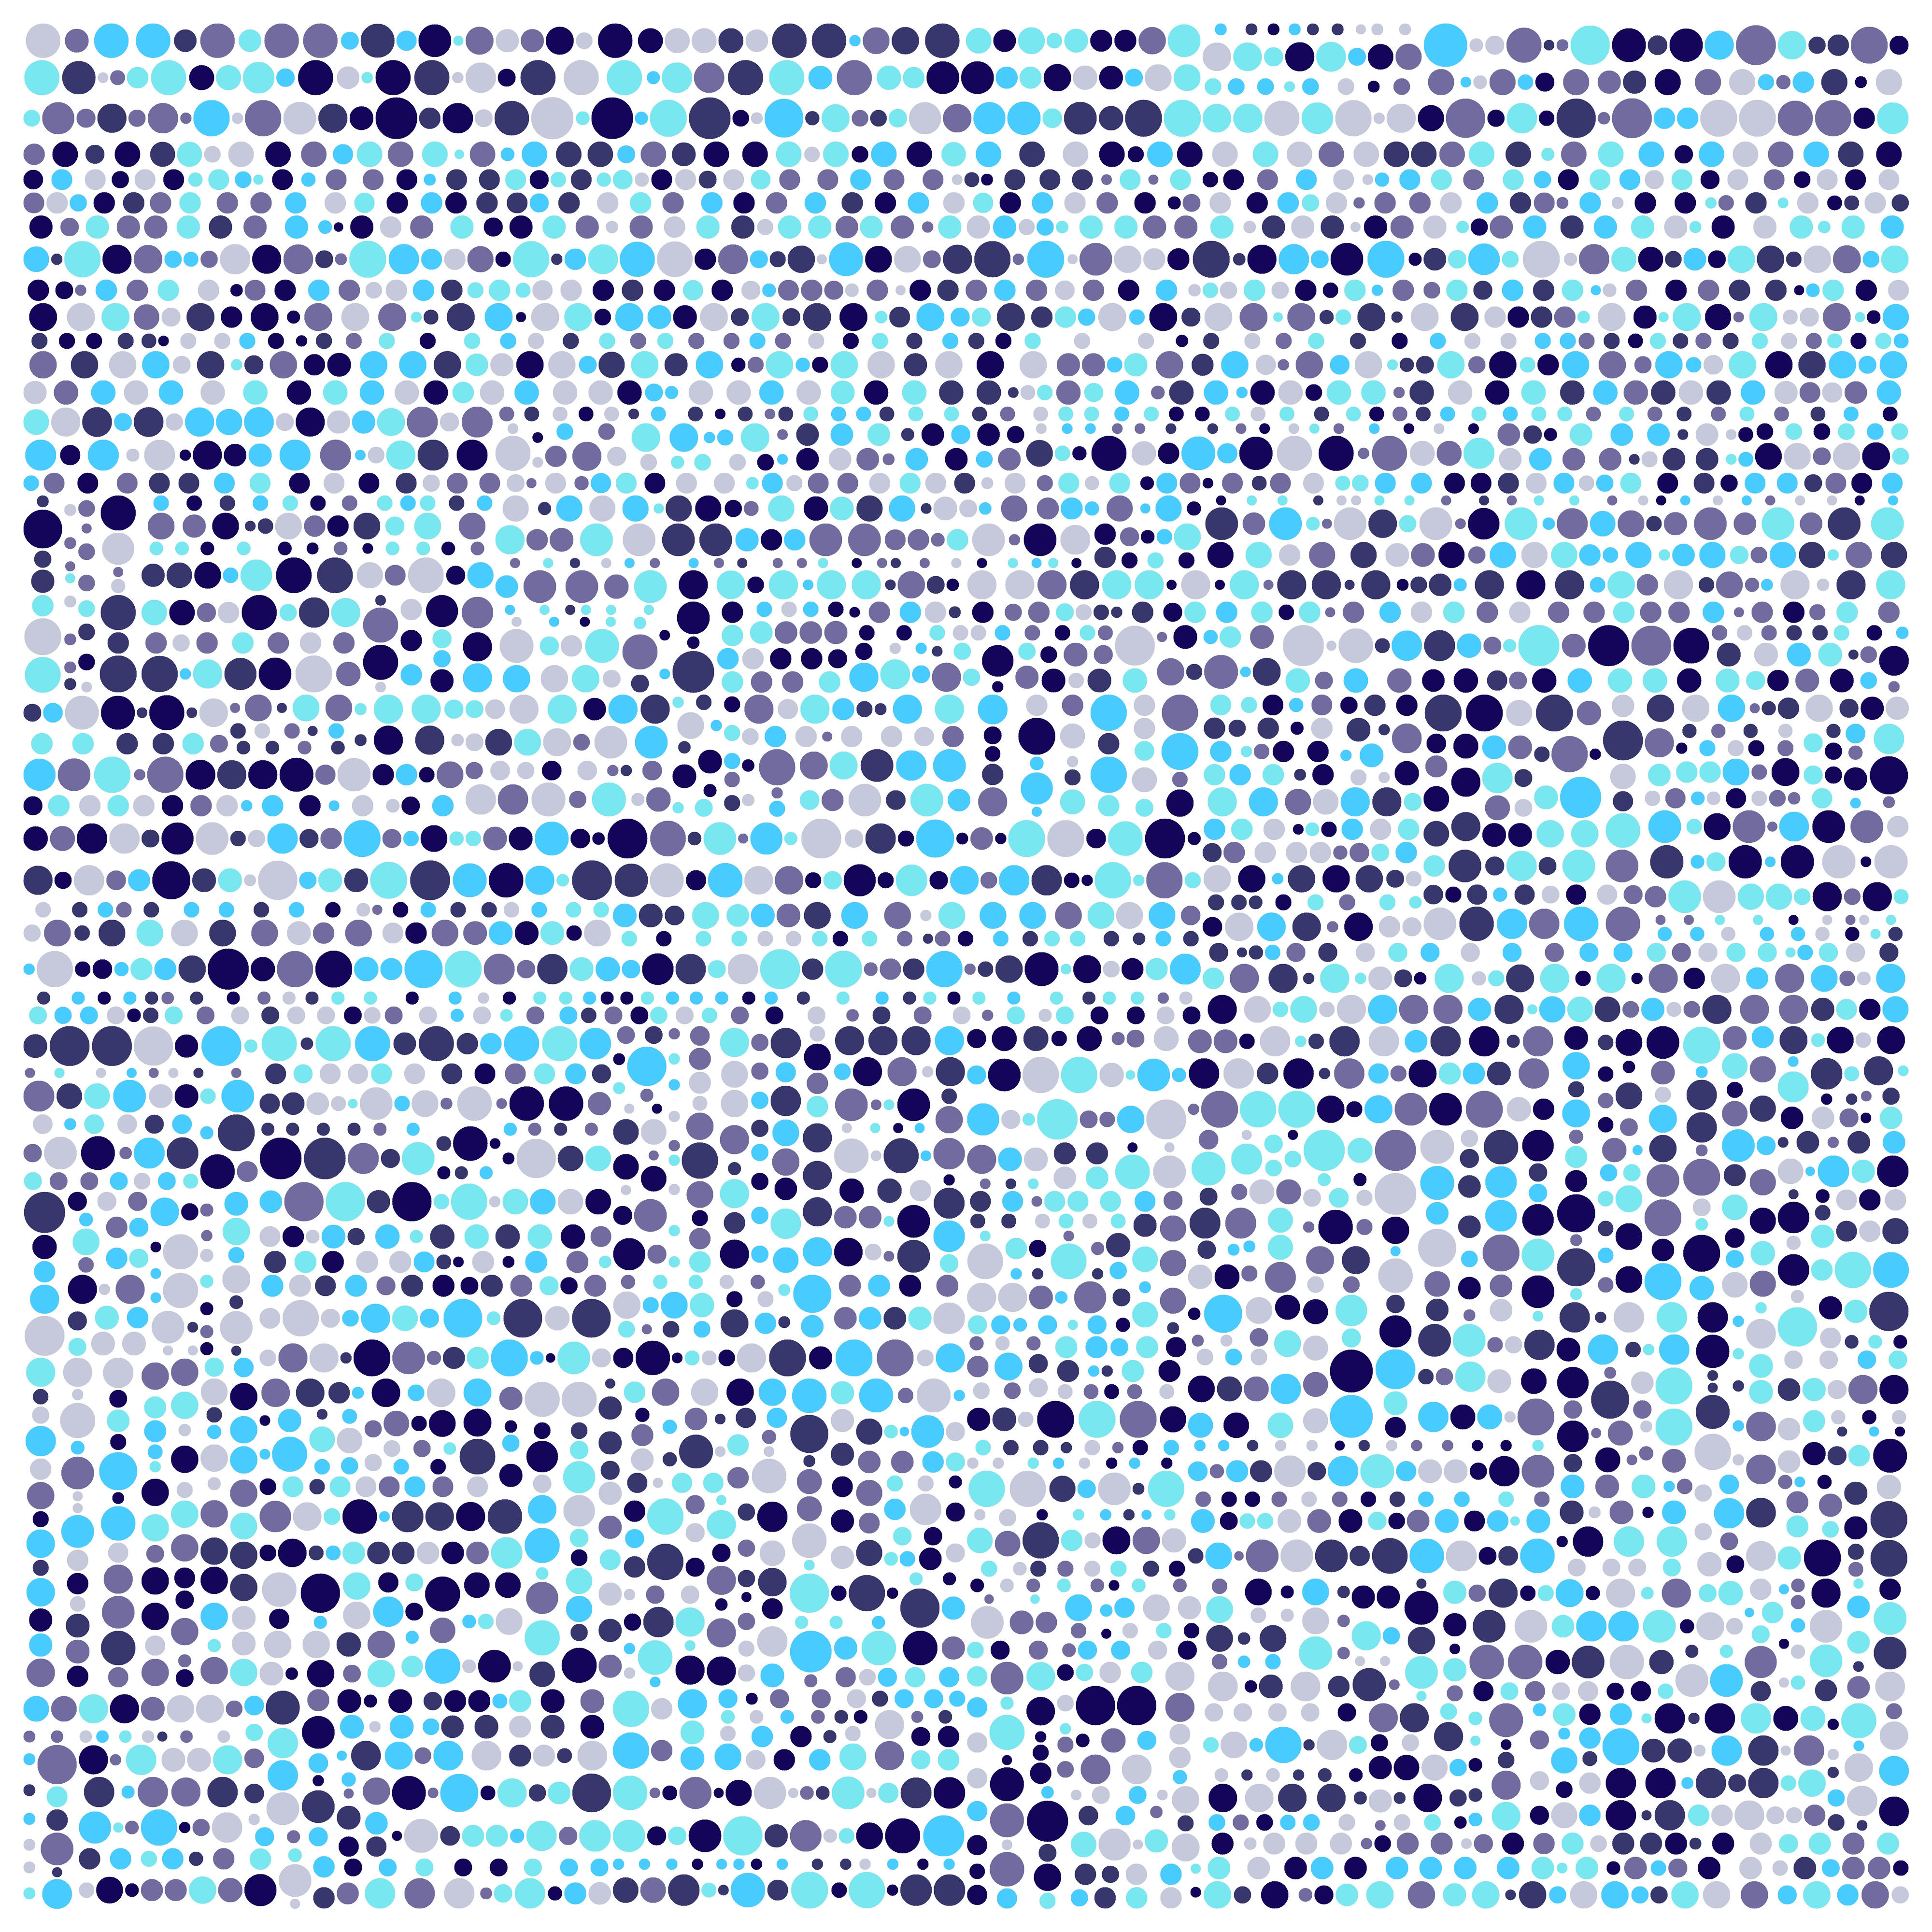 '4357 Circles' - Ethereum All-Time-High - MooniTooki Project - Abstract NFT Art @ 6480 x 6480 pixels. 